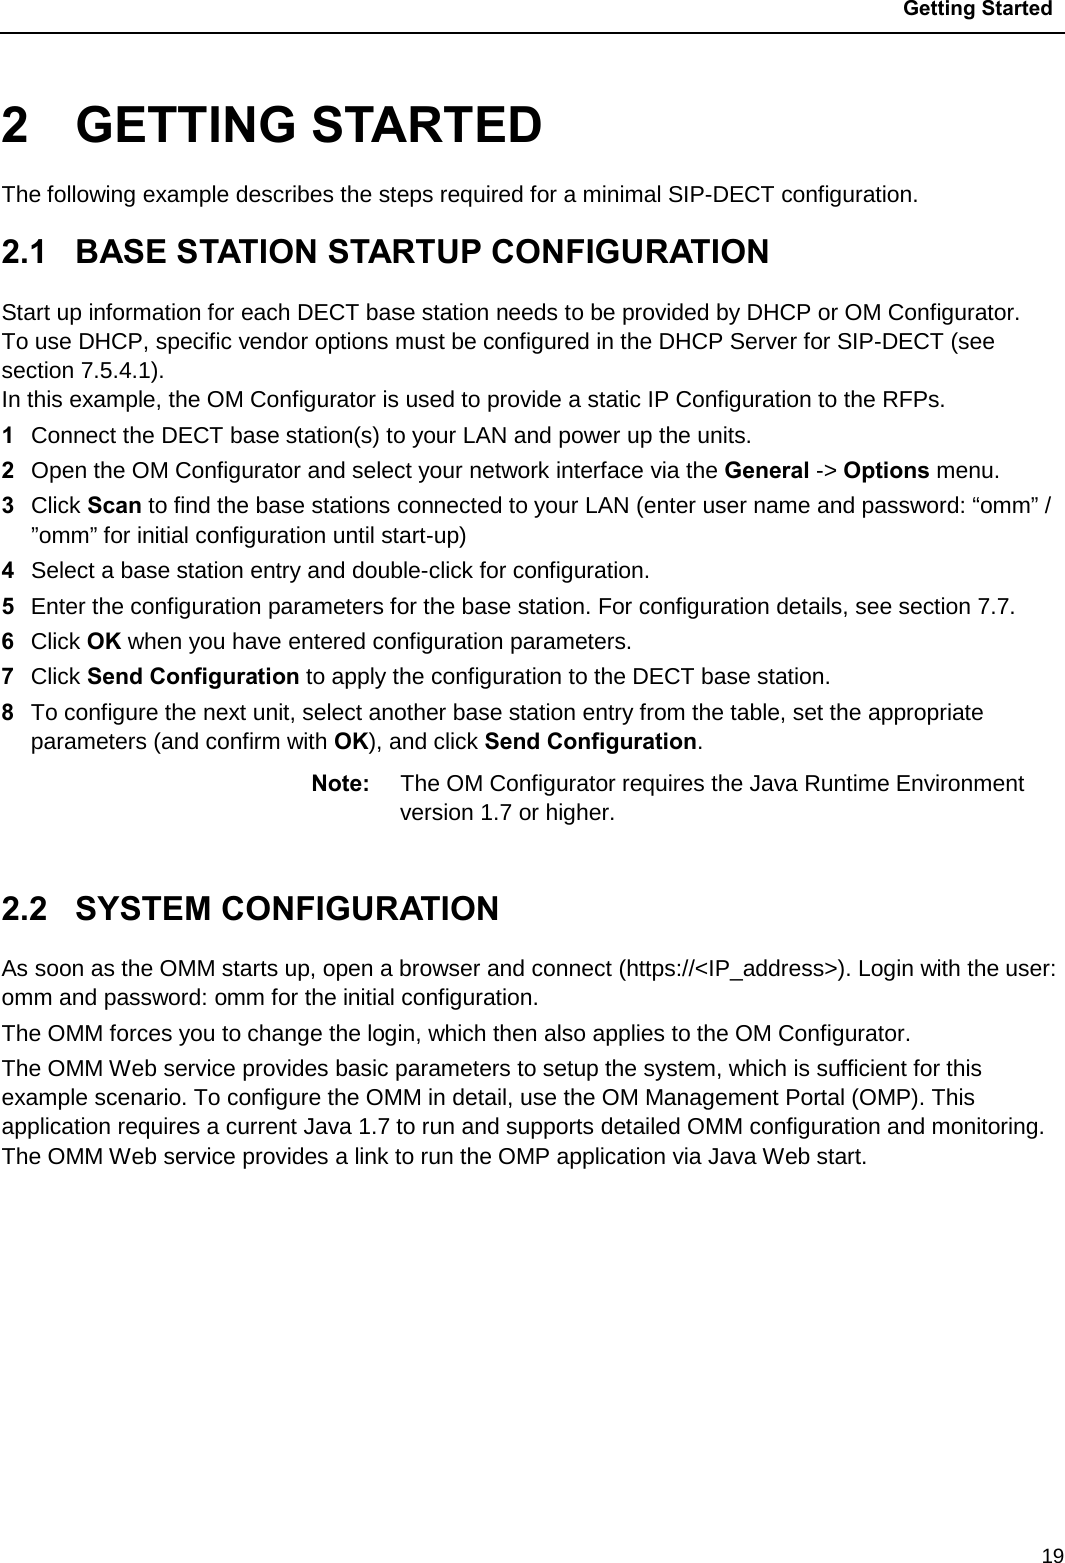  Getting Started  19 2  GETTING STARTED The following example describes the steps required for a minimal SIP-DECT configuration. 2.1  BASE STATION STARTUP CONFIGURATION Start up information for each DECT base station needs to be provided by DHCP or OM Configurator. To use DHCP, specific vendor options must be configured in the DHCP Server for SIP-DECT (see section 7.5.4.1). In this example, the OM Configurator is used to provide a static IP Configuration to the RFPs. 1  Connect the DECT base station(s) to your LAN and power up the units. 2  Open the OM Configurator and select your network interface via the General -&gt; Options menu. 3  Click Scan to find the base stations connected to your LAN (enter user name and password: “omm” / ”omm” for initial configuration until start-up) 4  Select a base station entry and double-click for configuration. 5  Enter the configuration parameters for the base station. For configuration details, see section 7.7. 6  Click OK when you have entered configuration parameters. 7  Click Send Configuration to apply the configuration to the DECT base station. 8  To configure the next unit, select another base station entry from the table, set the appropriate parameters (and confirm with OK), and click Send Configuration.  Note: The OM Configurator requires the Java Runtime Environment version 1.7 or higher.  2.2  SYSTEM CONFIGURATION As soon as the OMM starts up, open a browser and connect (https://&lt;IP_address&gt;). Login with the user: omm and password: omm for the initial configuration.  The OMM forces you to change the login, which then also applies to the OM Configurator.  The OMM Web service provides basic parameters to setup the system, which is sufficient for this example scenario. To configure the OMM in detail, use the OM Management Portal (OMP). This application requires a current Java 1.7 to run and supports detailed OMM configuration and monitoring. The OMM Web service provides a link to run the OMP application via Java Web start.         